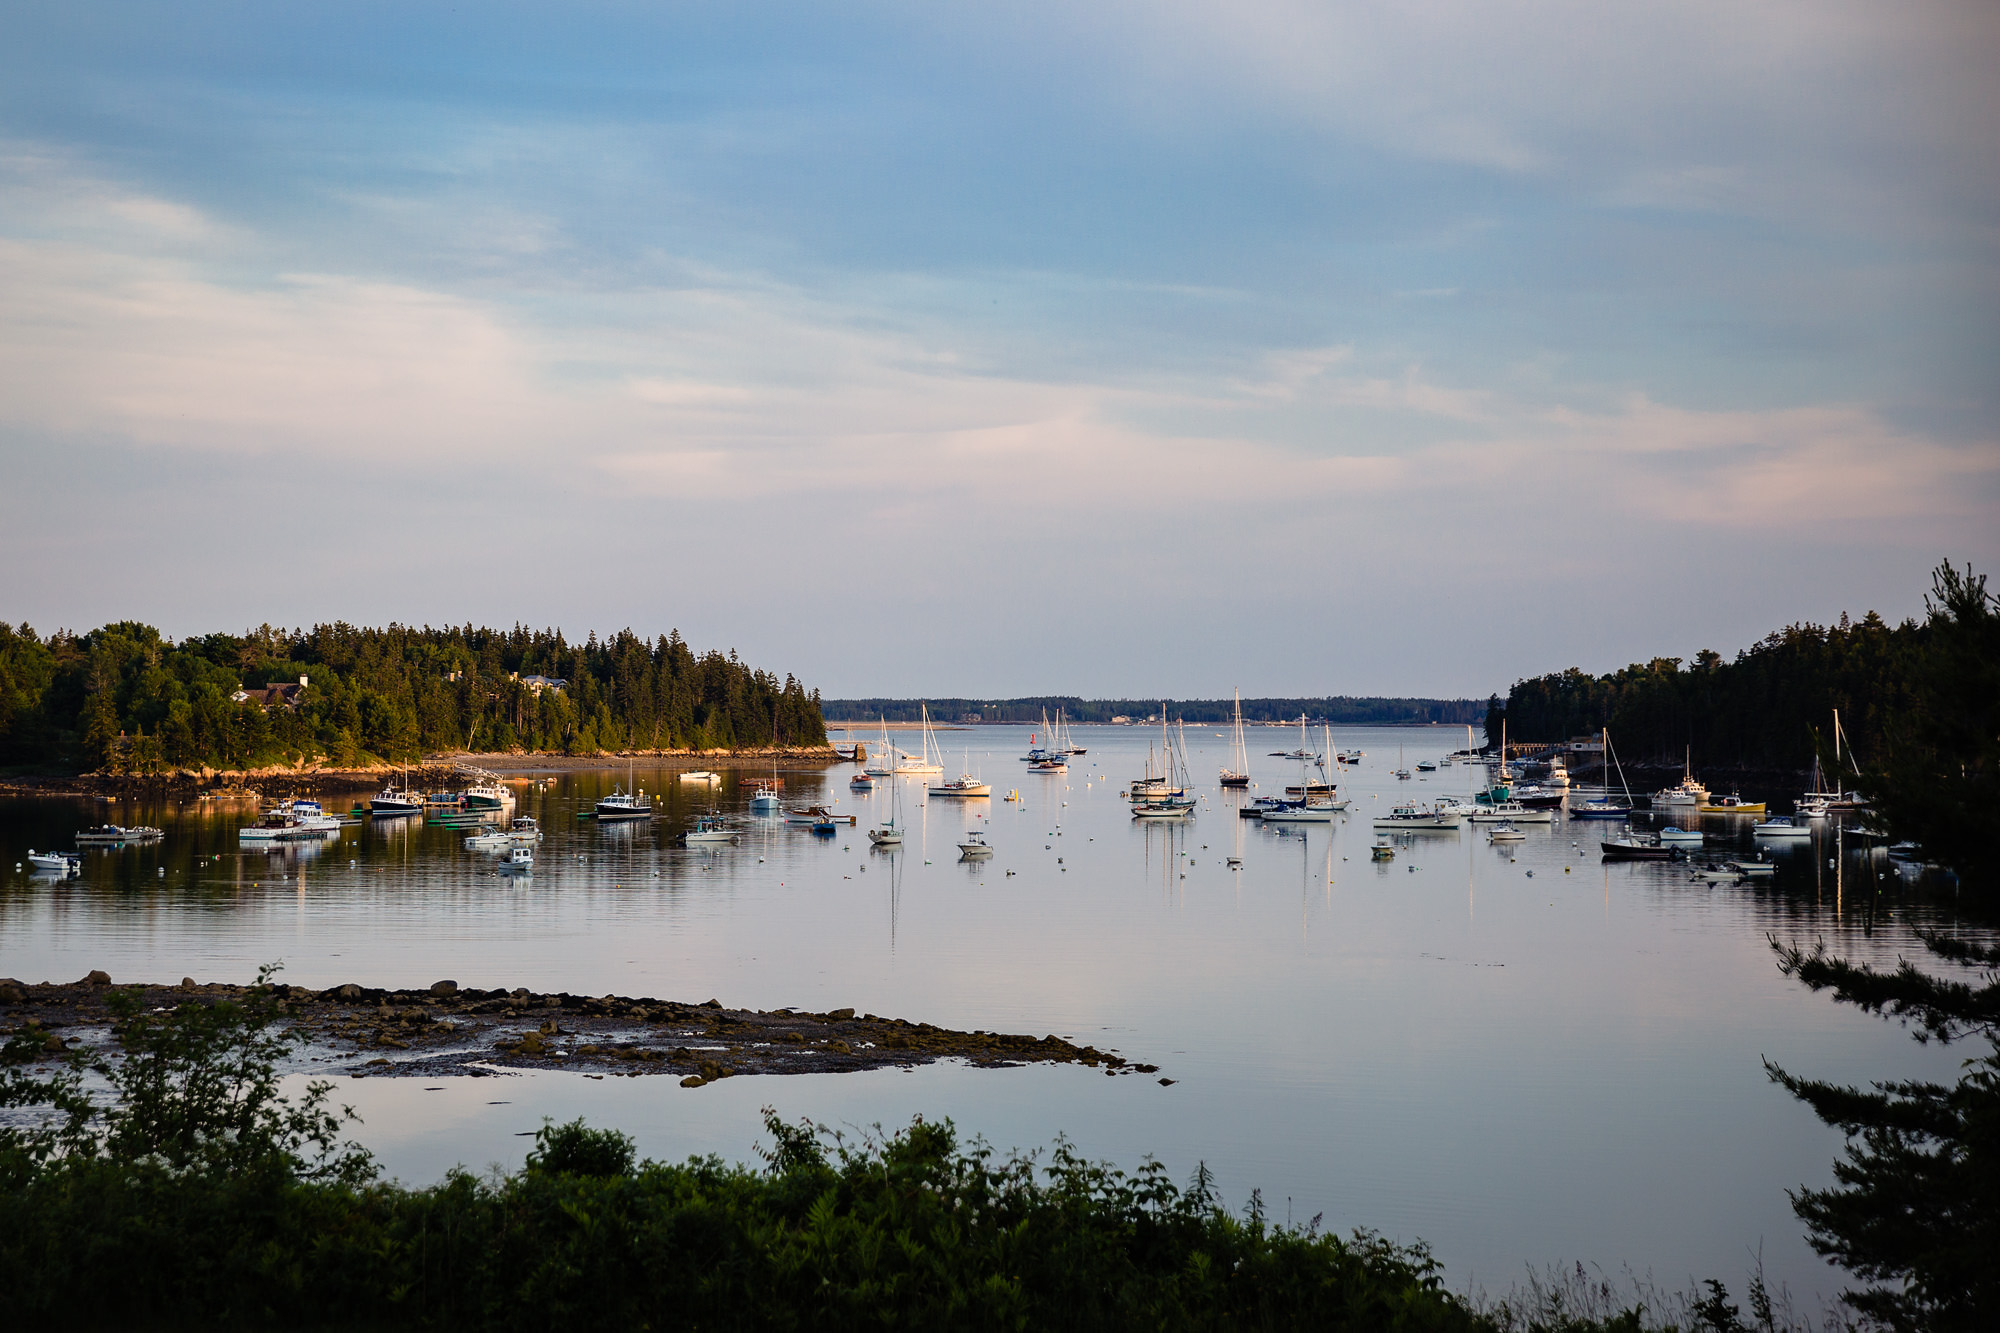 View from Asticou Inn, in Northeast Harbor, ME